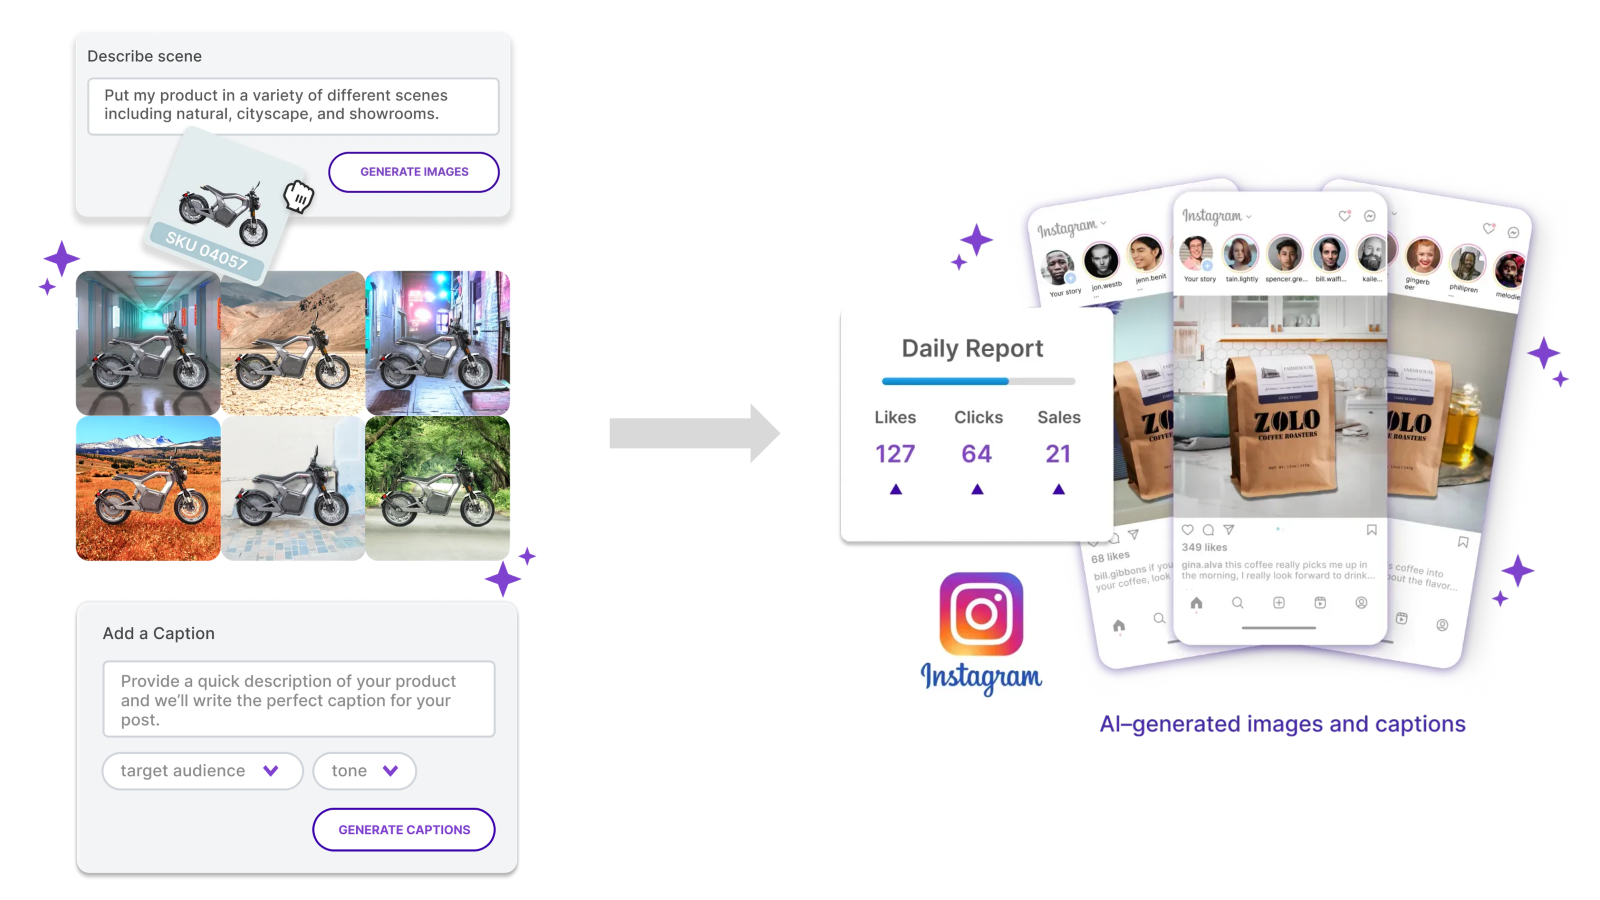 Make product visuals and captions with AI and publish to social